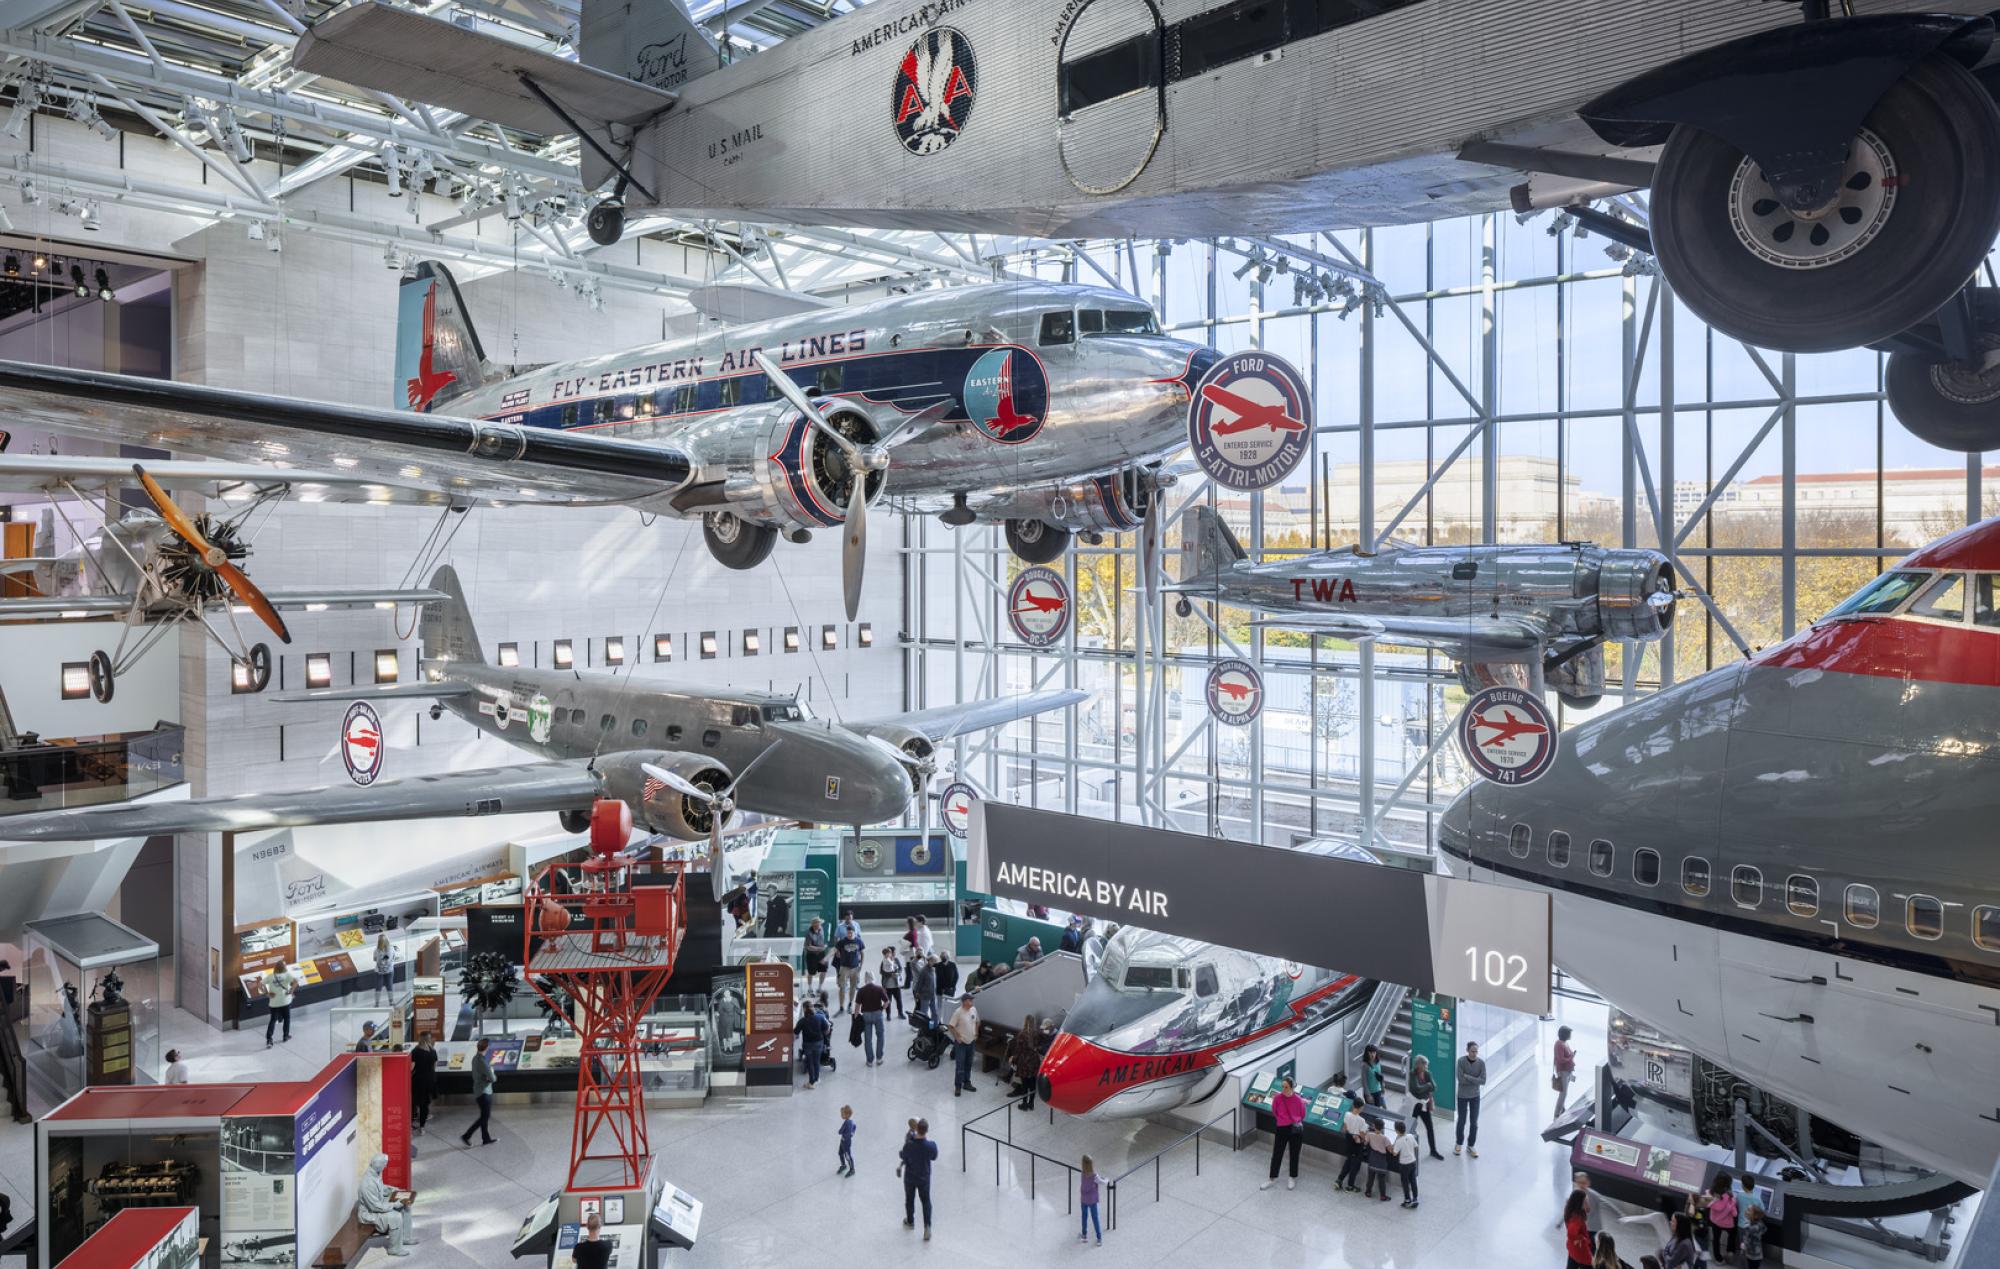 Silver airplanes are suspended in the air in an atrium of the Smithsonian's National Air and Space Museum